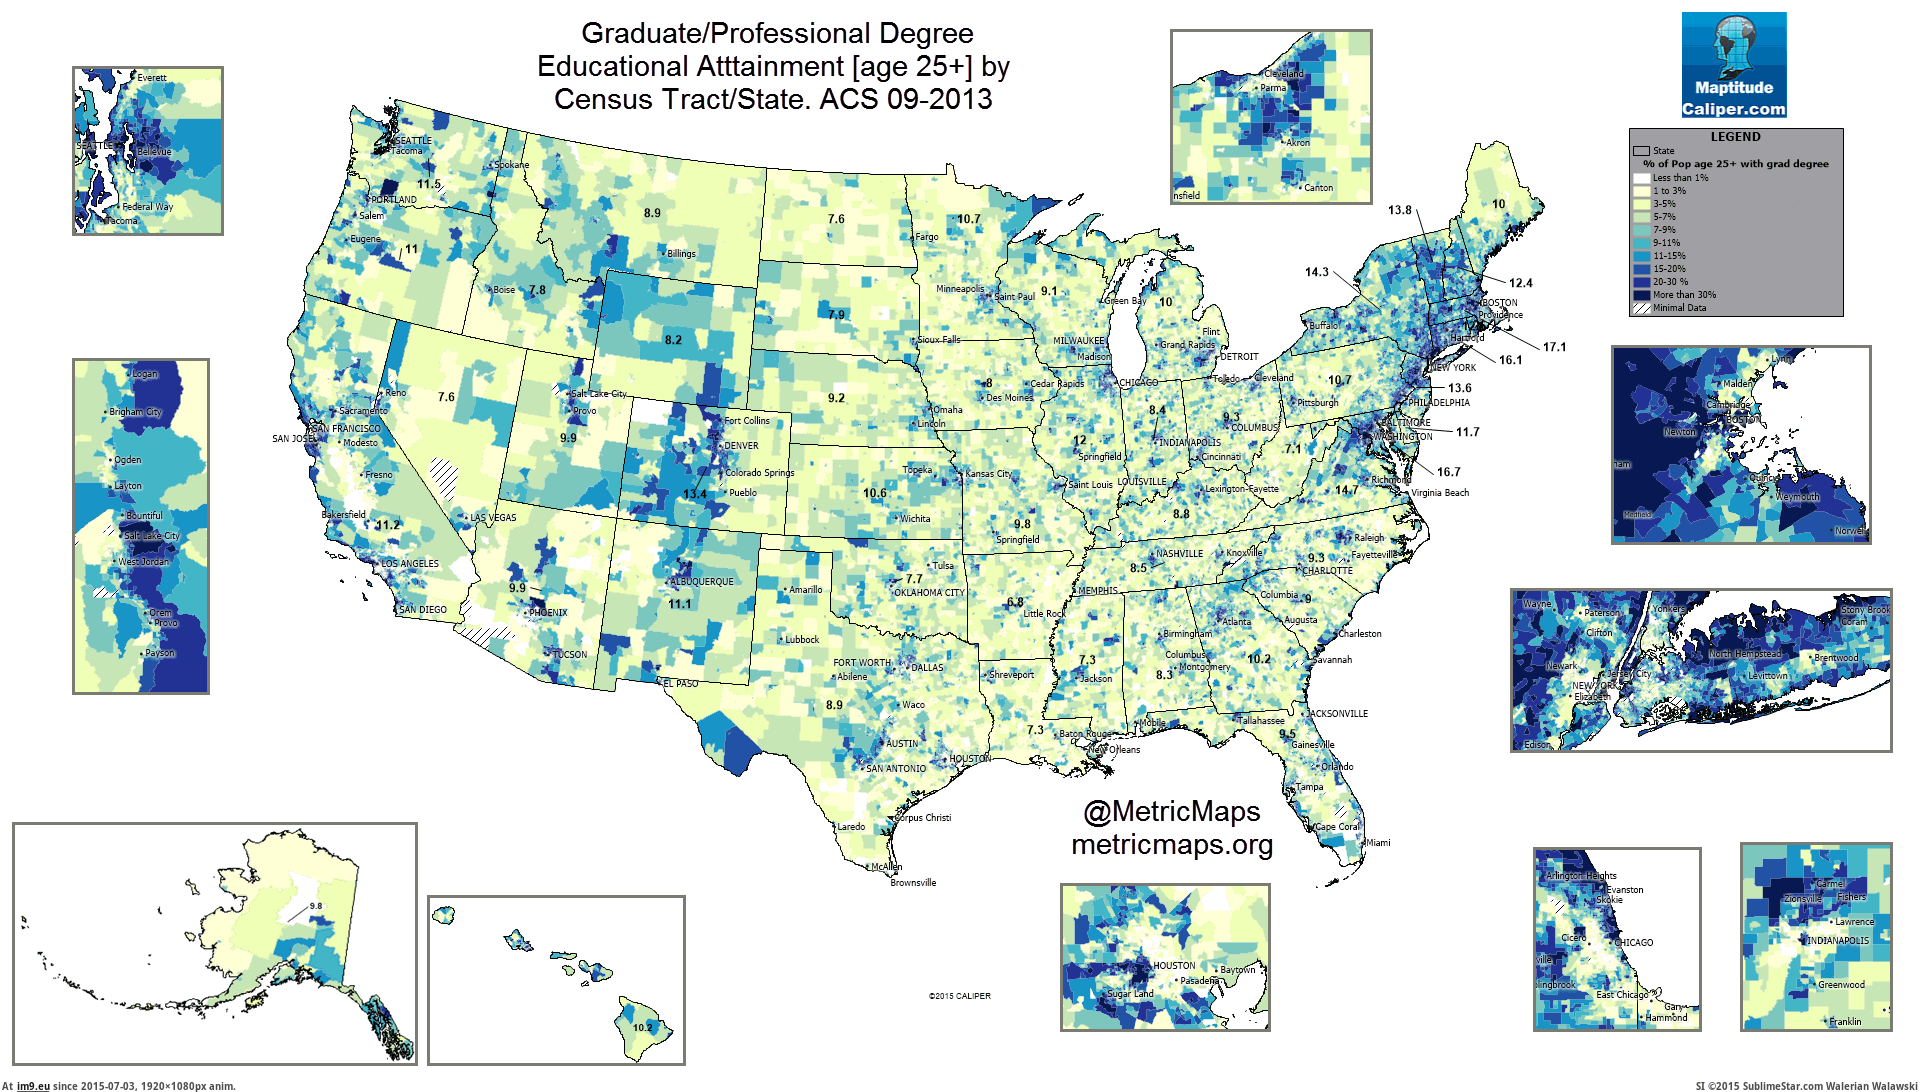 1920px x 1092px - GIF #State #Population #Professional #Tract #Graduate #Degree #Census,  844550B â€“ My r/MAPS favs